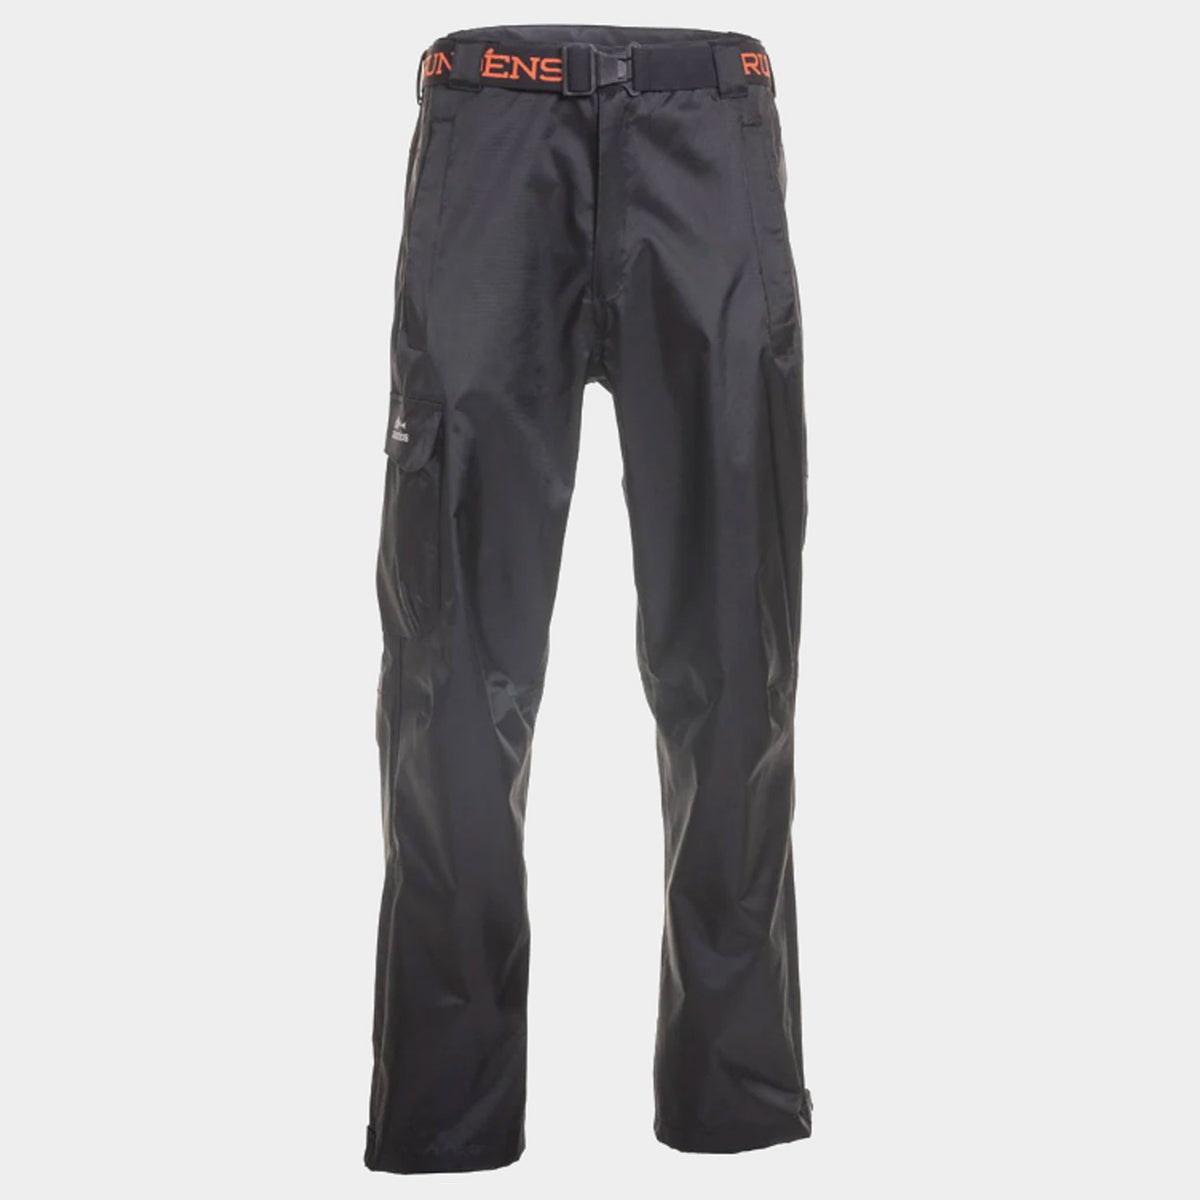 Grundens Weather Watch WP Fishing Pant - Work World - Workwear, Work Boots, Safety Gear